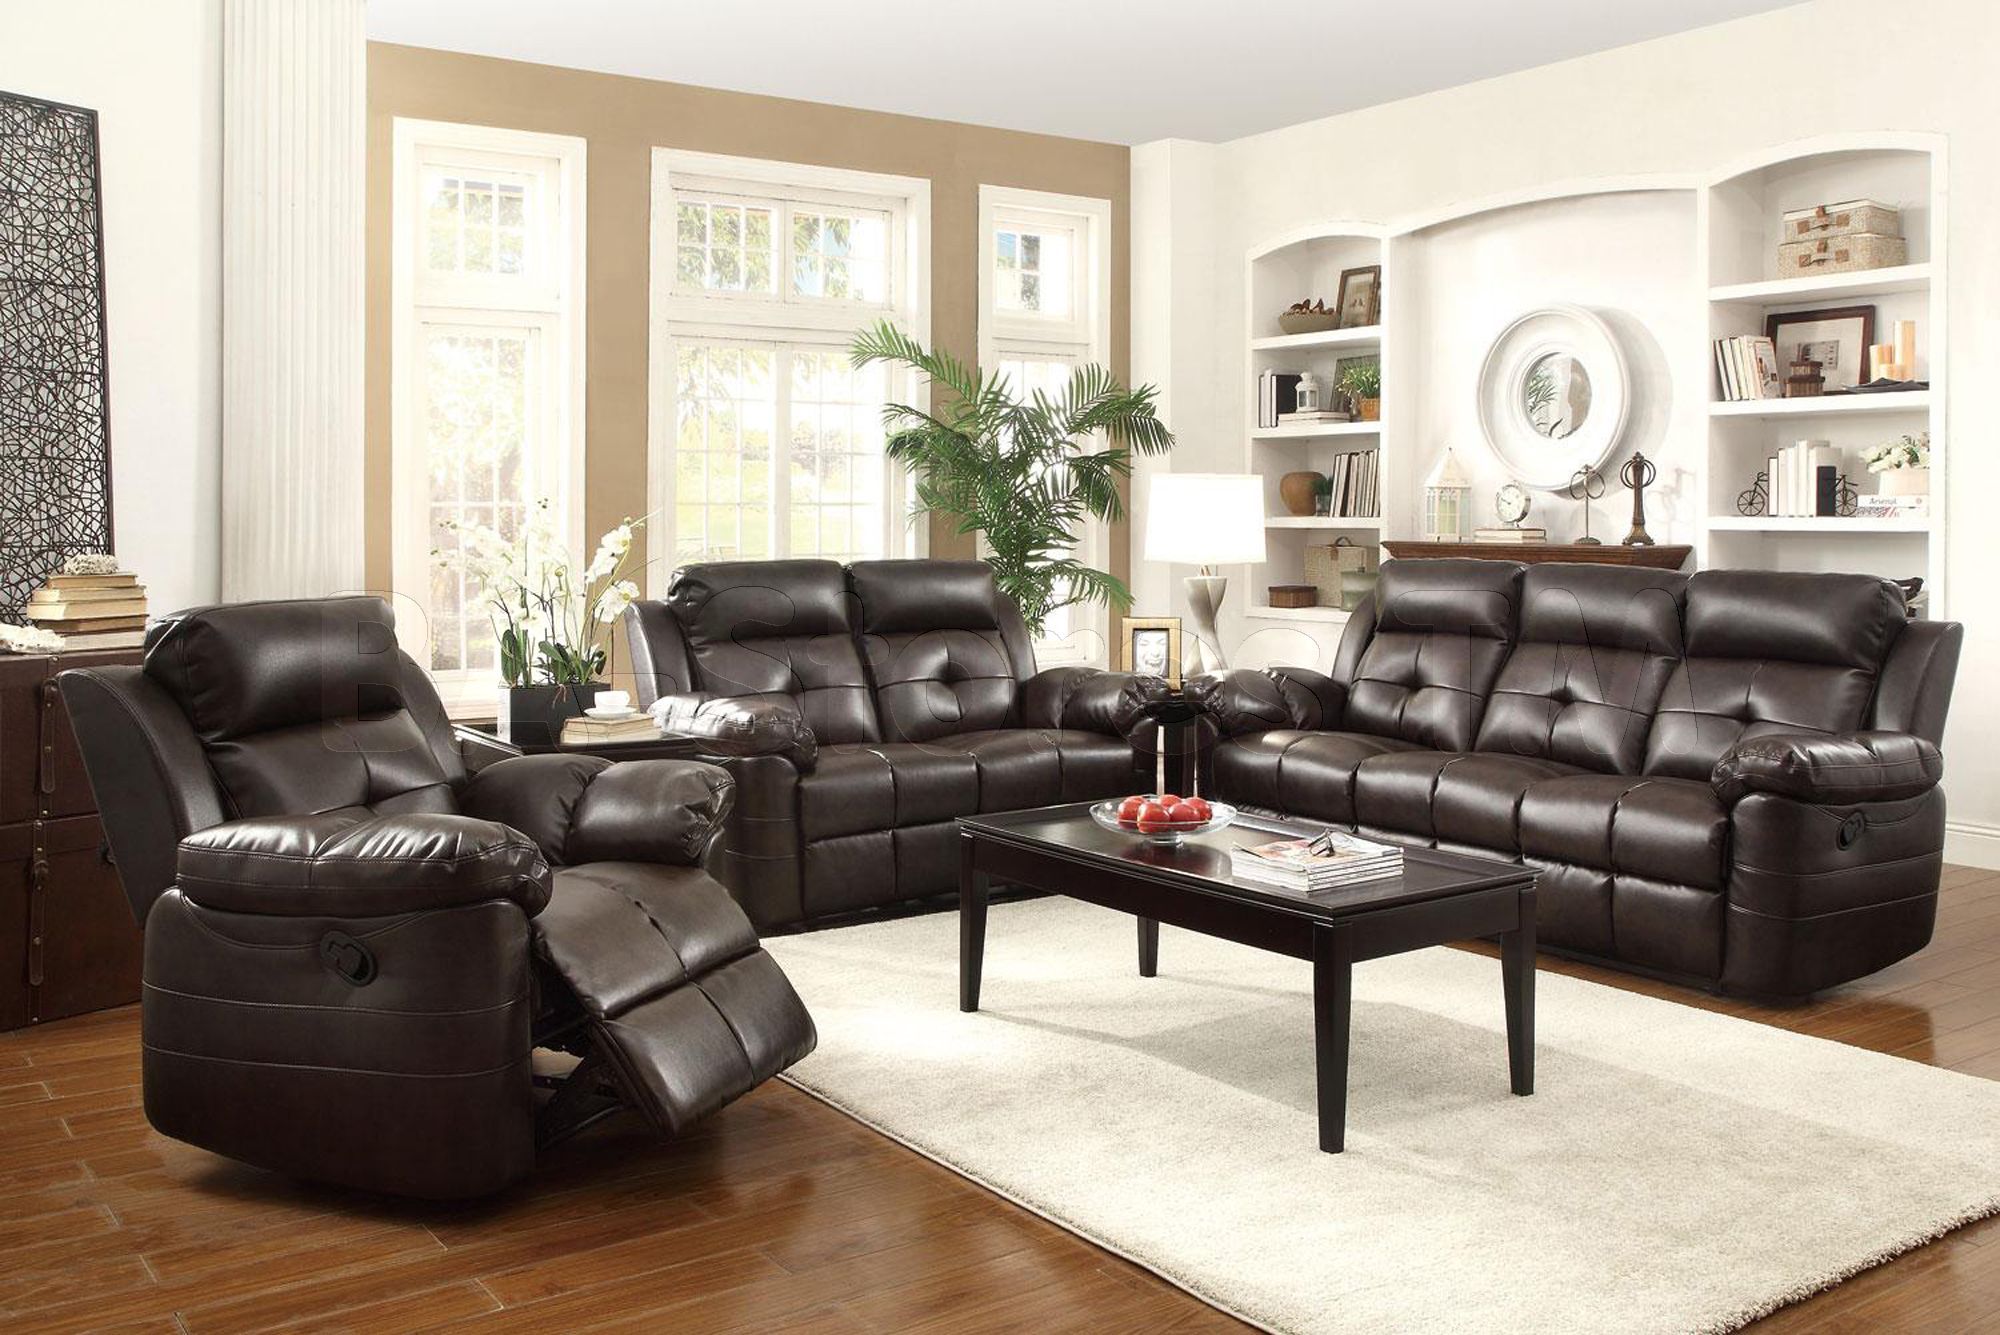 Keating Dark Brown Bonded Leather Match 3 Pc Motion Sofa With 3Pc Bonded Leather Upholstered Wooden Sectional Sofas Brown (View 15 of 15)